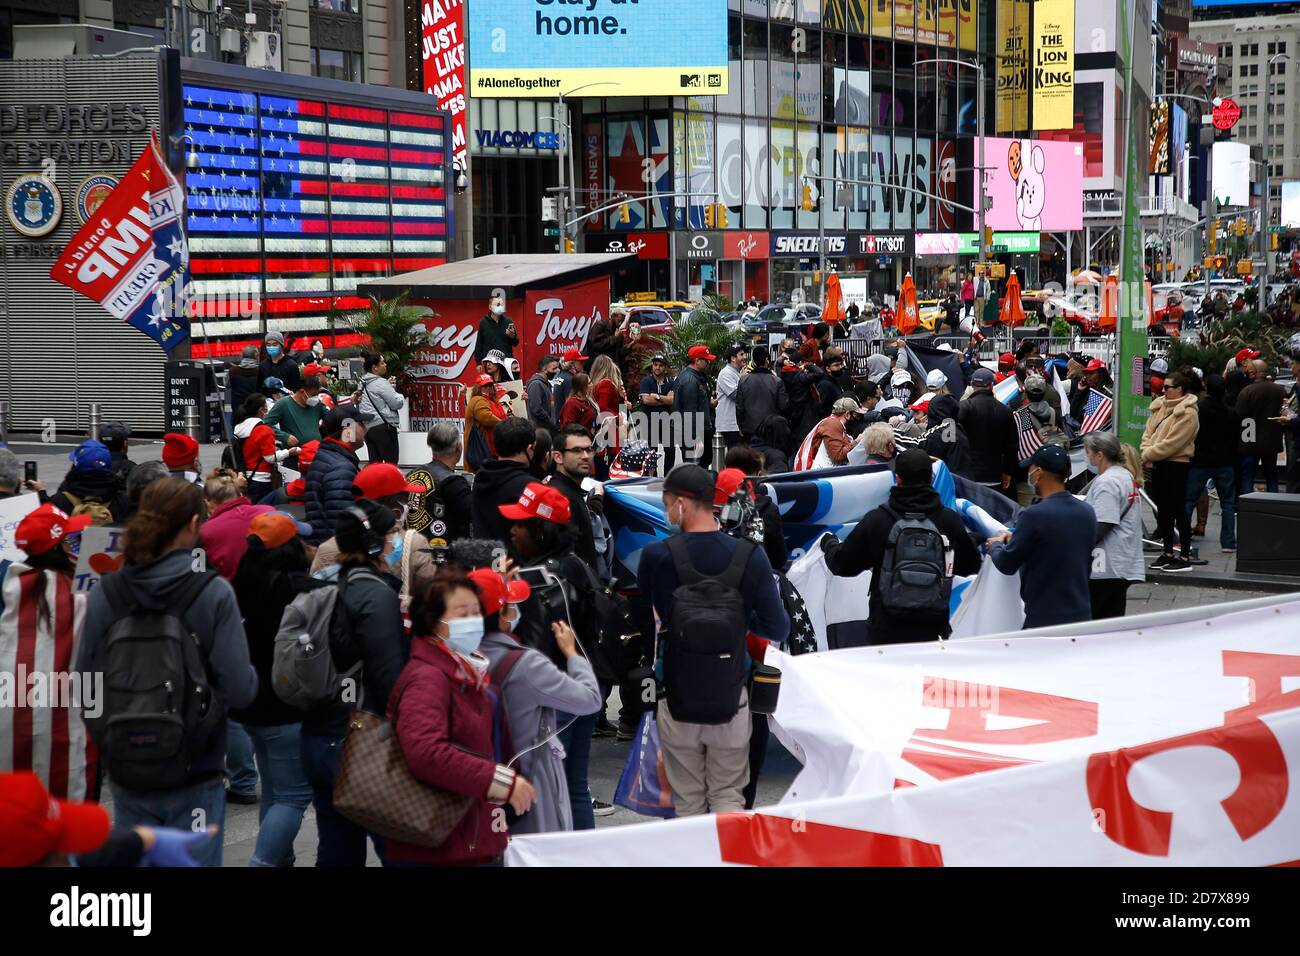 New York City, USA. 25th Oct, 2020. Pro Trump supporters clash with left-wing demonstrators following a march to Times Square on October 25, 2020 in New York City. As the November 3rd Presidential Election nears, tensions are high on both political lsides, often resulting in physical violence and police arrests. (Photo by John Lamparski/SIPA USA) Credit: Sipa USA/Alamy Live News Stock Photo